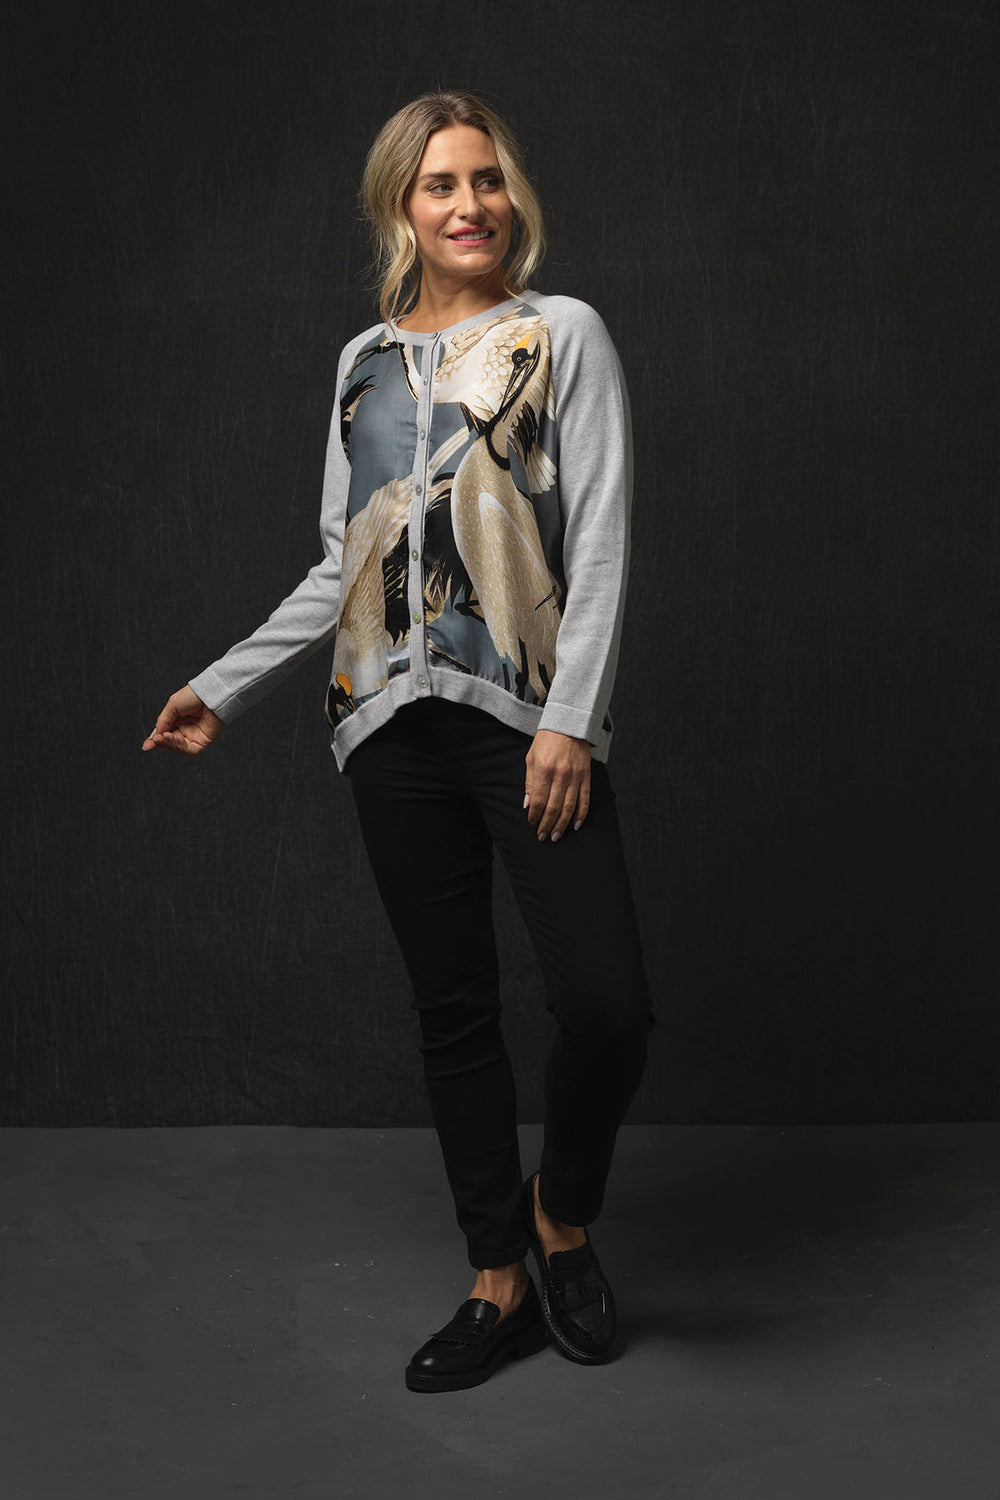 Storks and cranes have been a major art deco trend in both fashion and interiors and this Stork Slate Cotton Cardigan is perfect for anyone looking for something chic, stylish and in vogue!